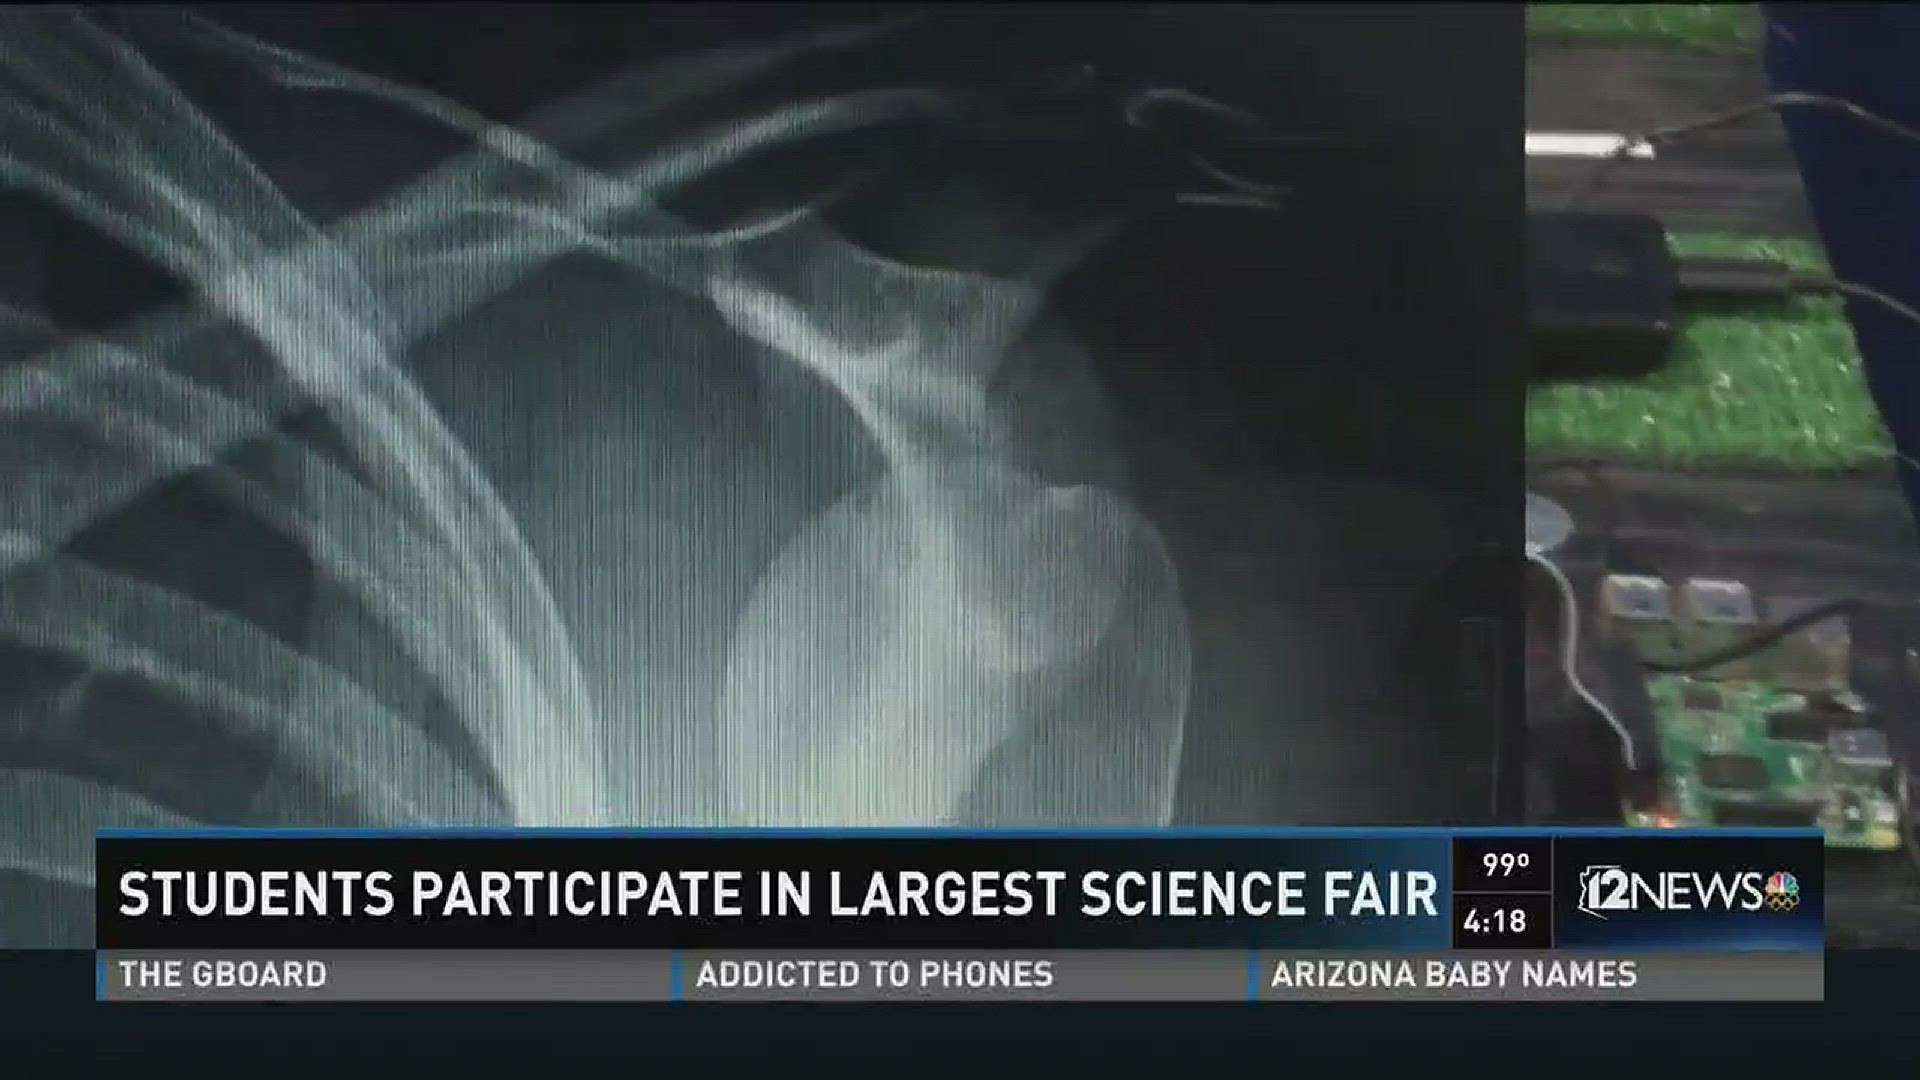 School Student Full X Videos - Hundreds participate in world's largest high school science fair | 12news. com